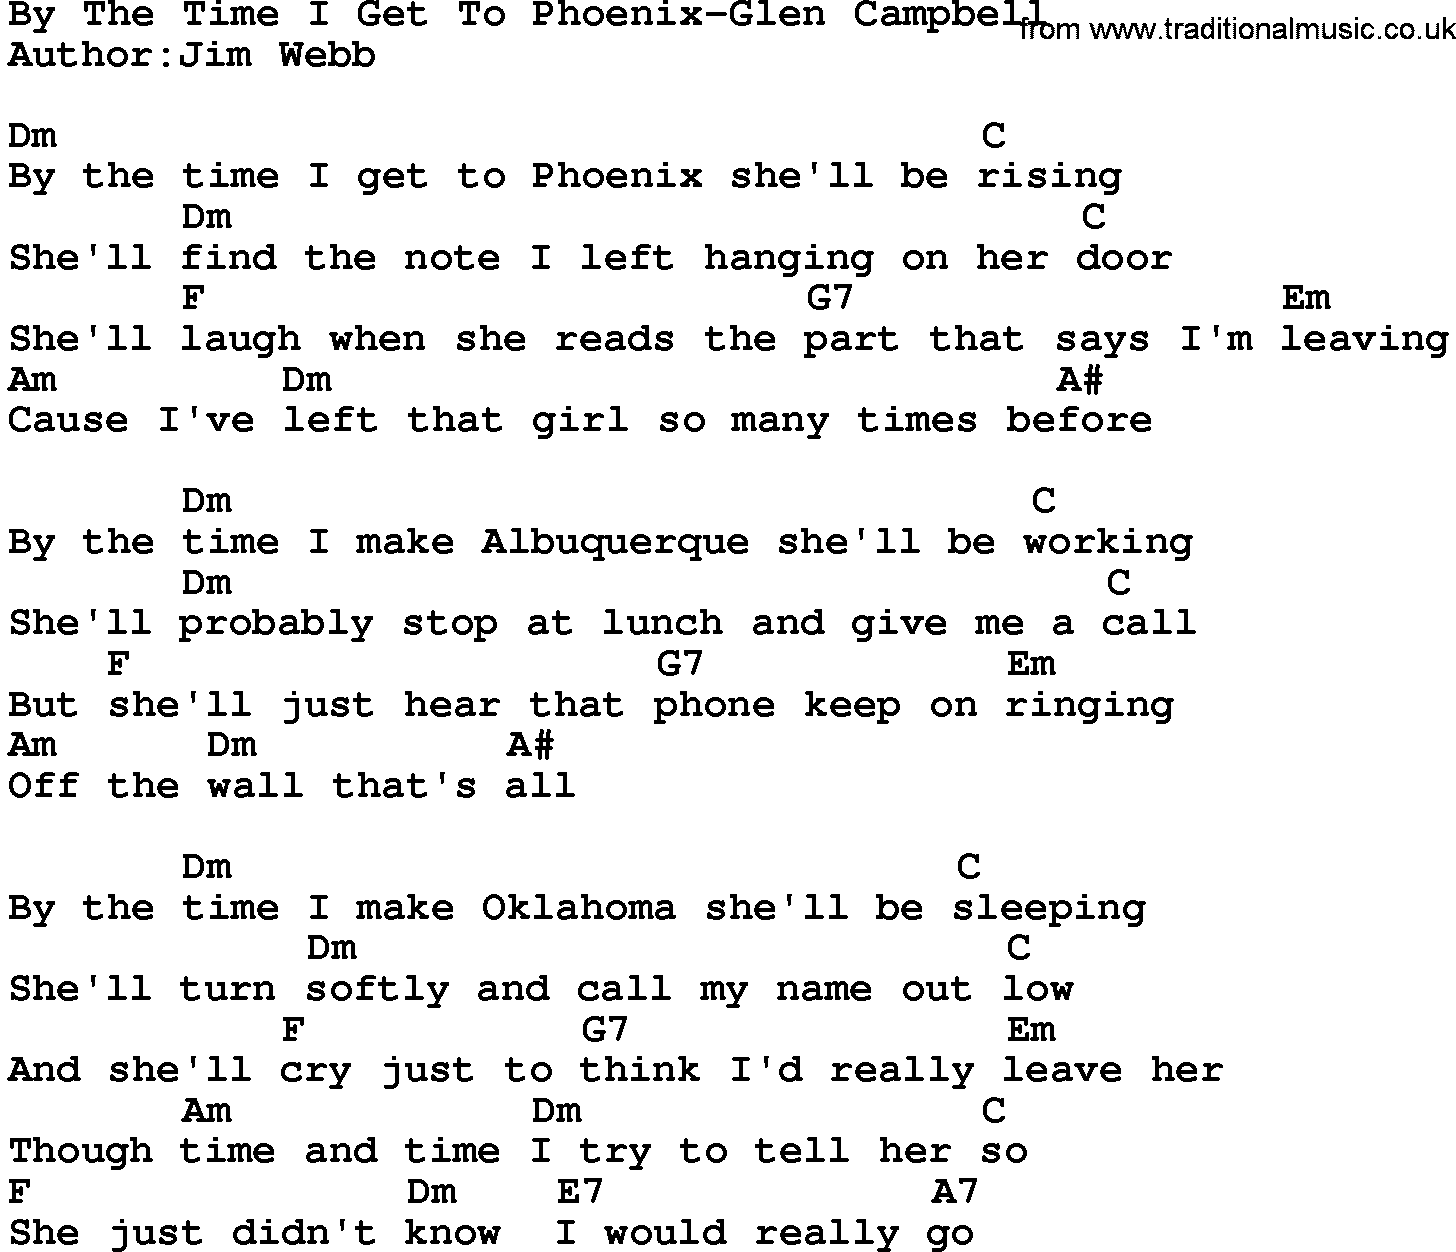 Country music song: By The Time I Get To Phoenix-Glen Campbell lyrics and chords